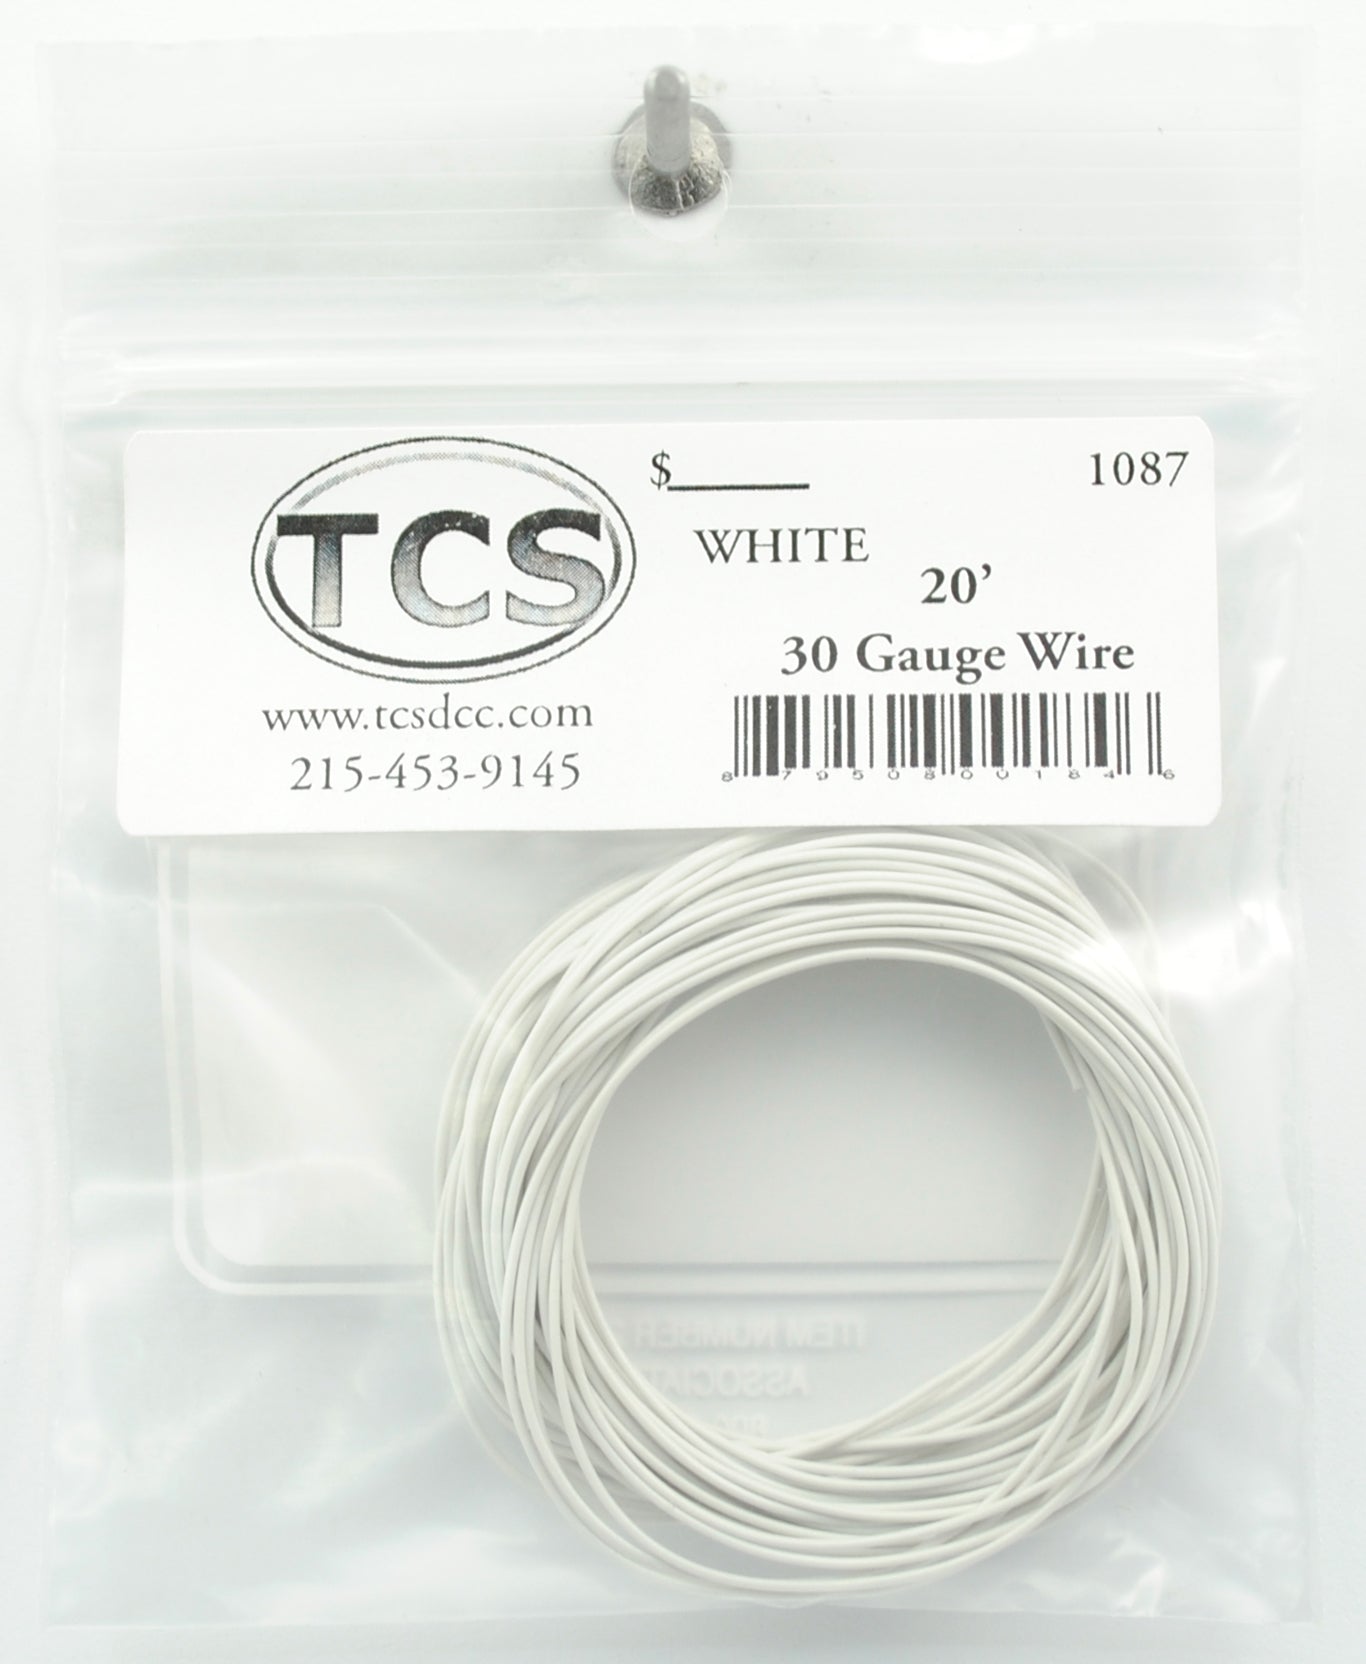 Train Control Systems 1087 White 20' of 30 Gauge Wire